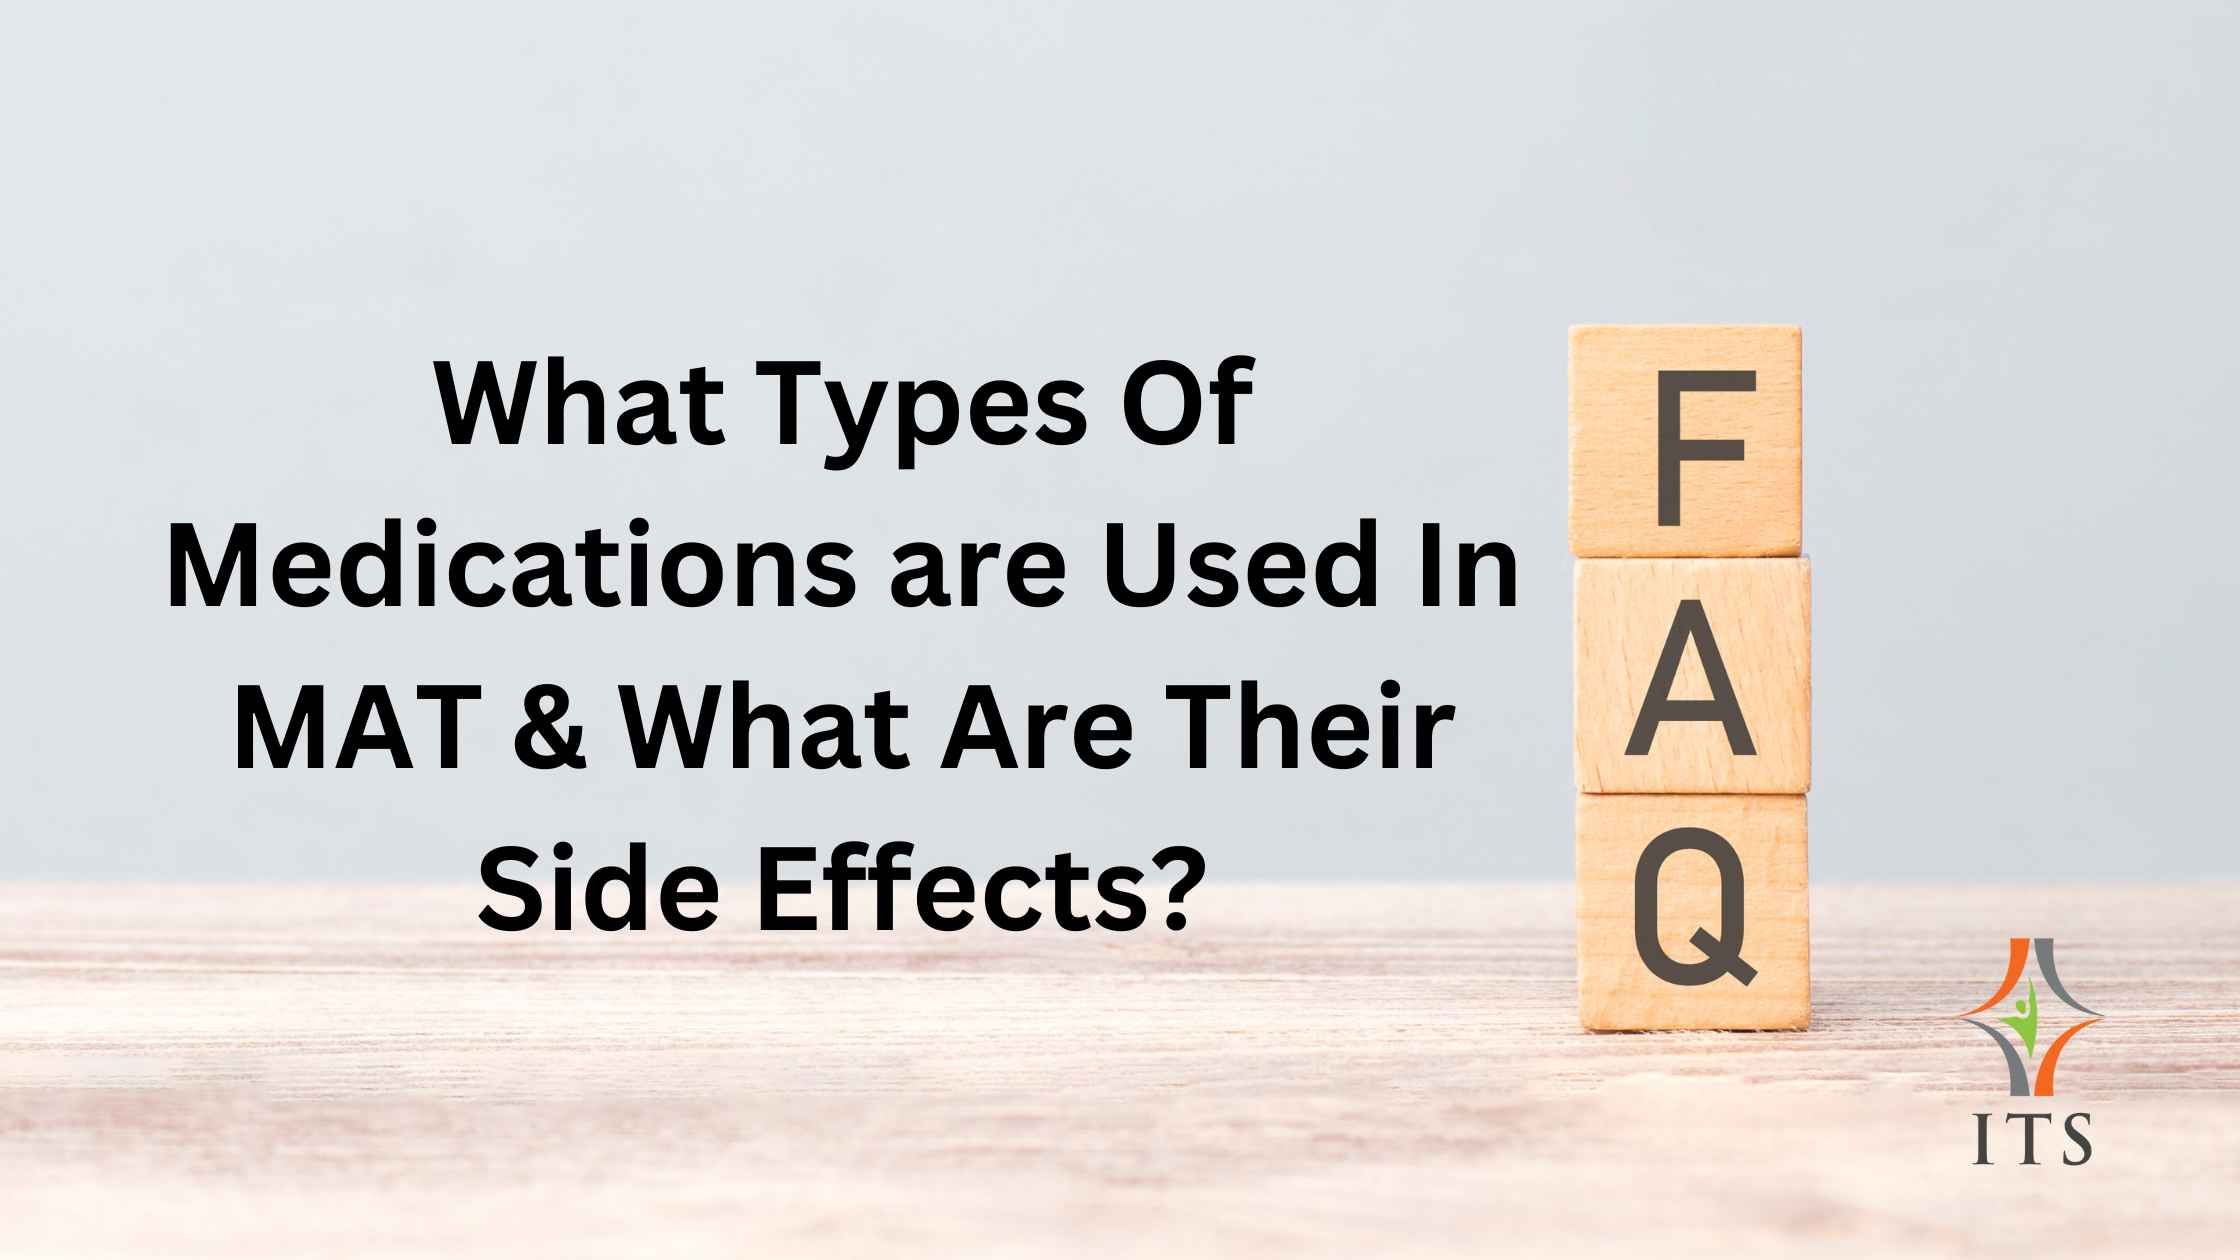 What Types of Medications are used in MAT and what are their side effects?